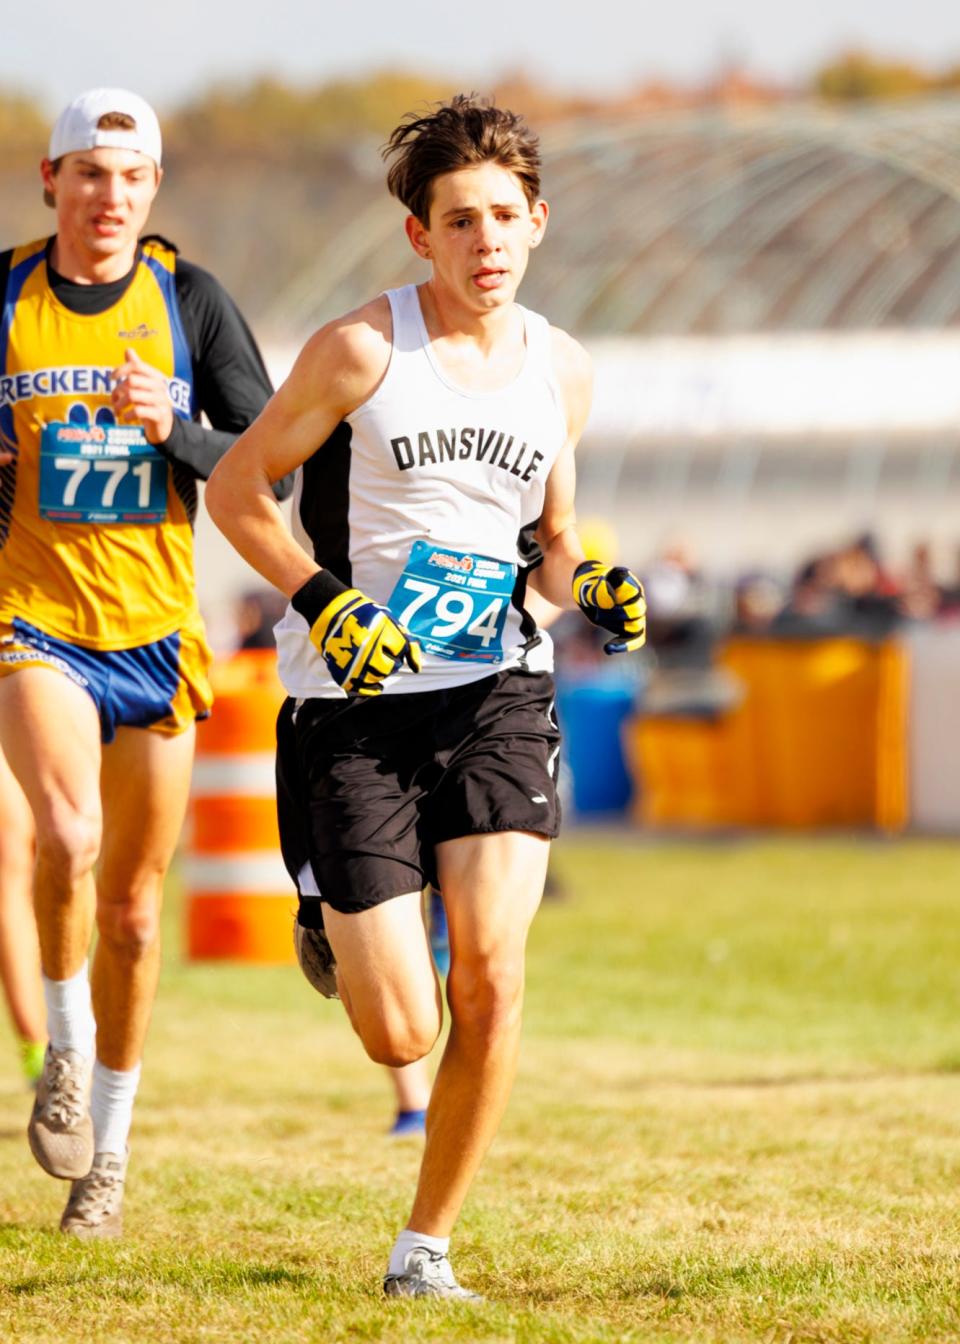 Dansville's Theodore Davis took home fifth-place honors in the MHSAA Division 4 cross country championships Saturday, Nov. 6, 2021 at Michigan International Speedway. (TIMOTHY ARRICK)